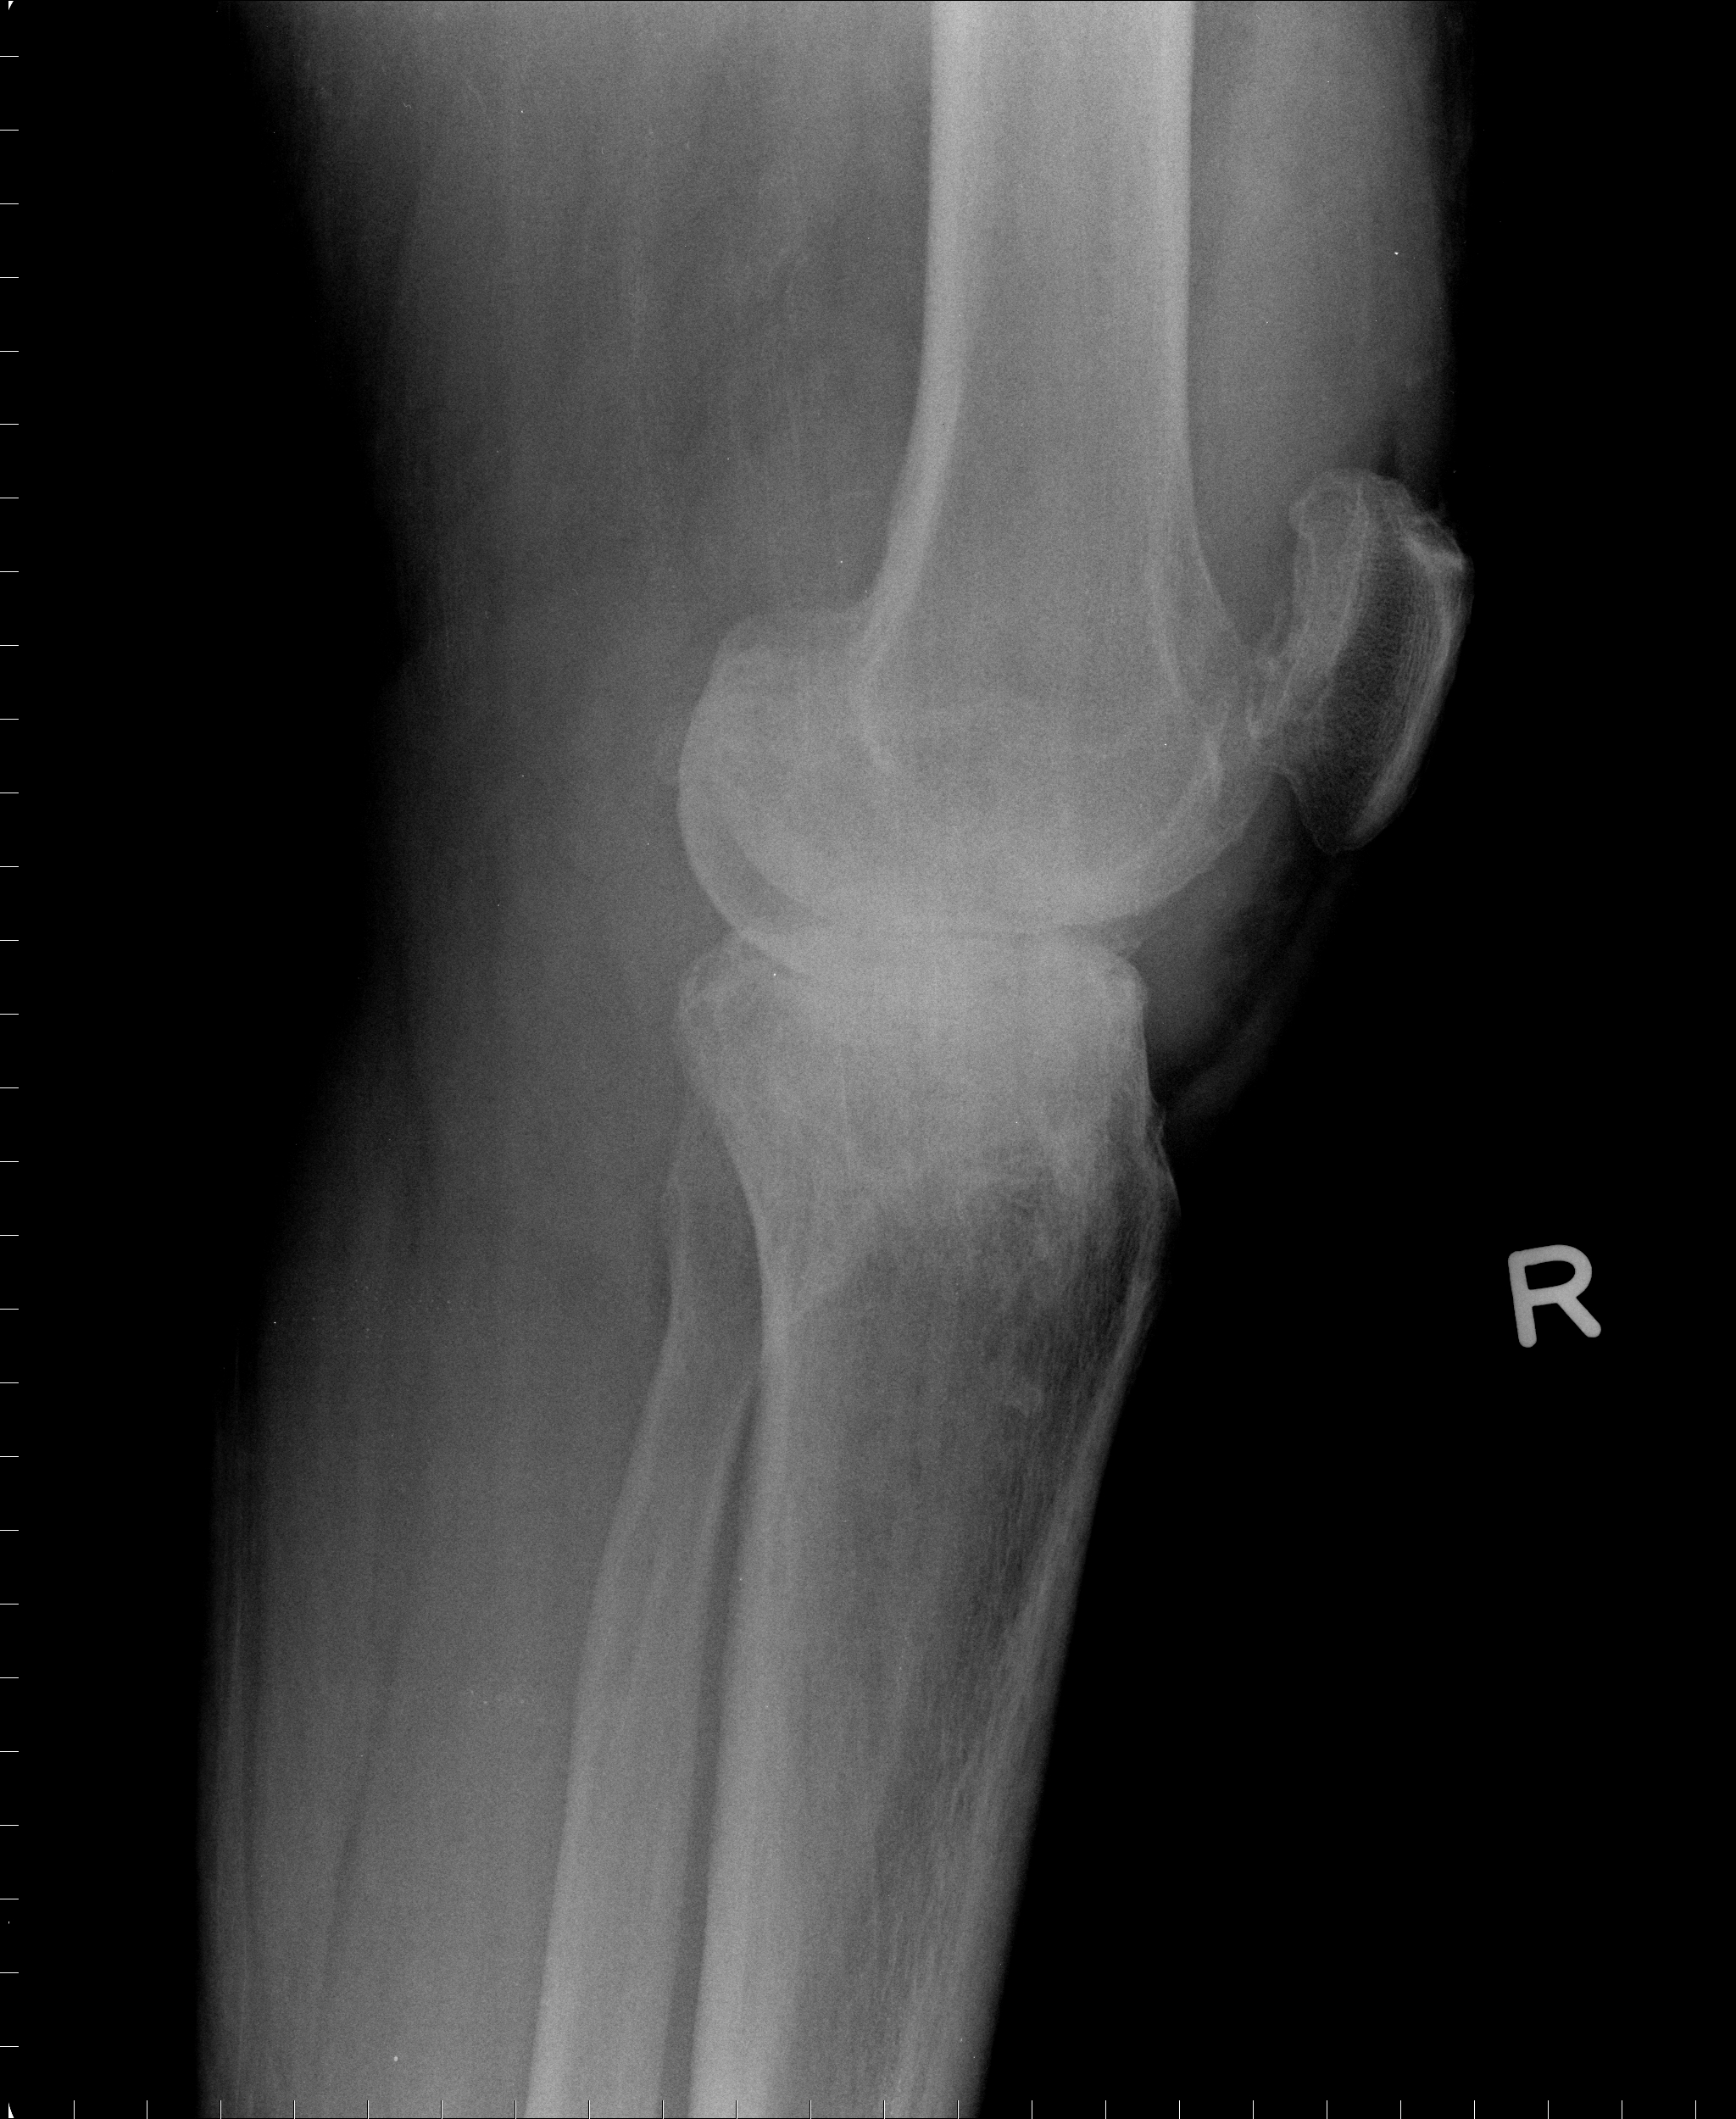 Lateral view of the knee in this patient with swelling, demonstrating erosions, a large high density joint effusion suggestive of pigmented villonodular synovitis (PVNS)